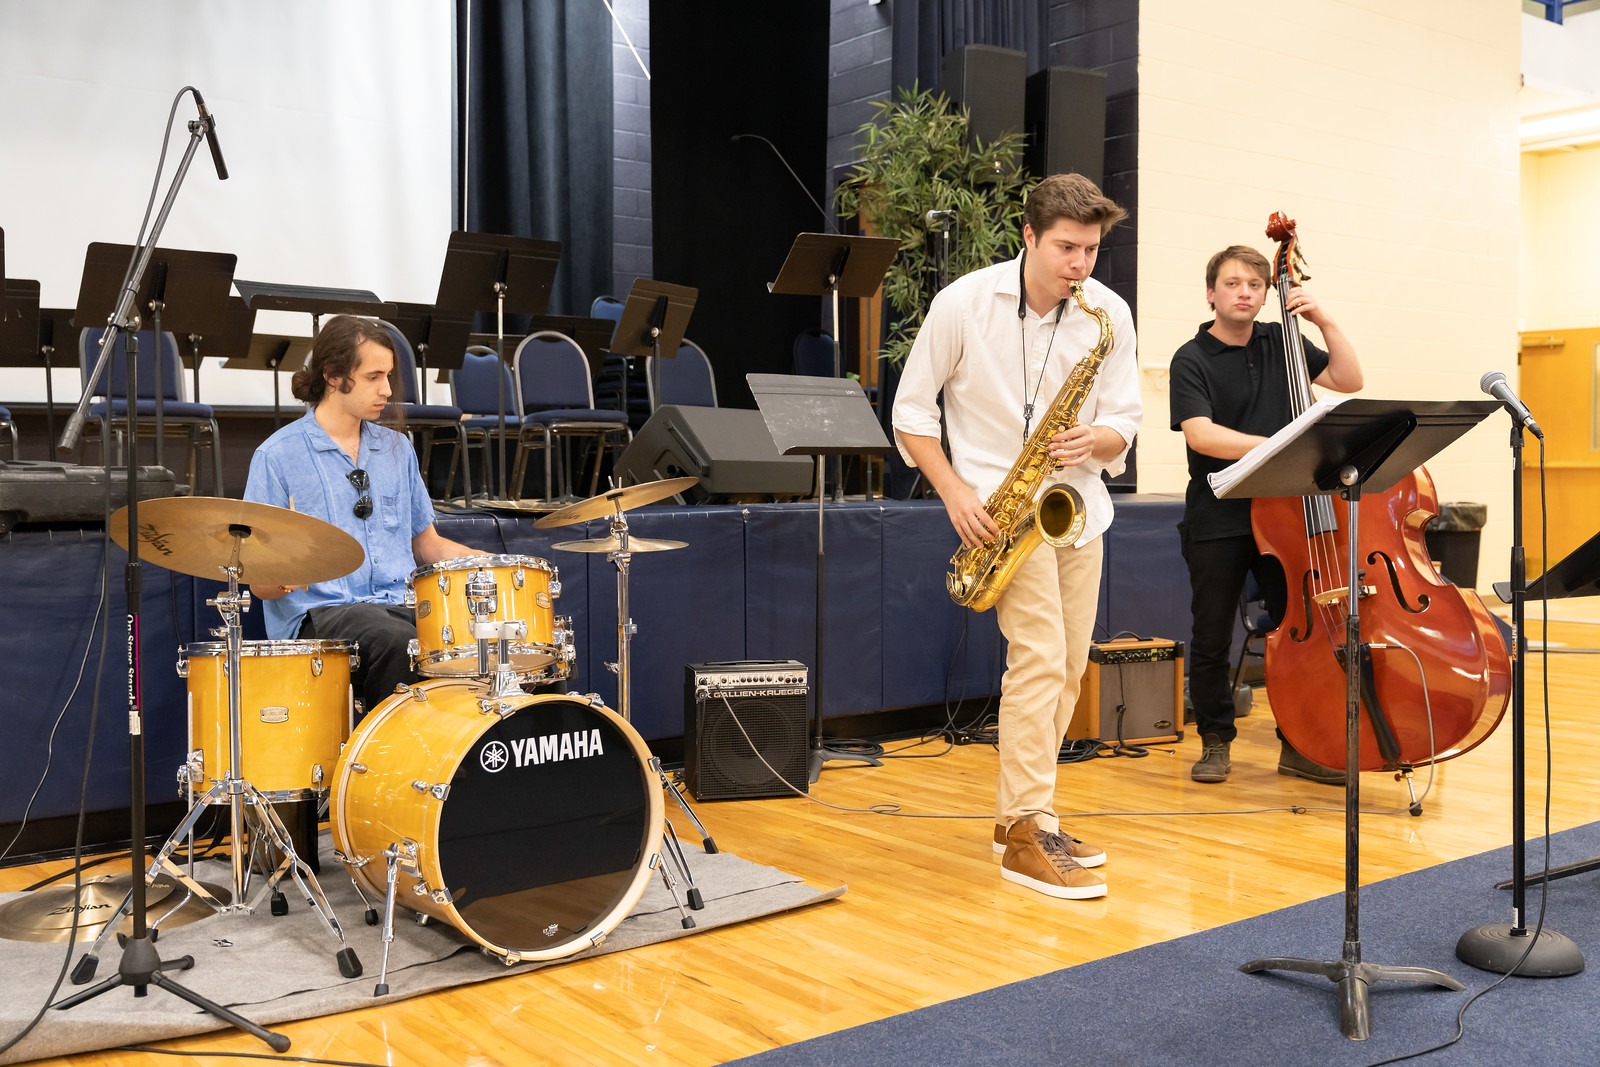 Students playing jazz instruments